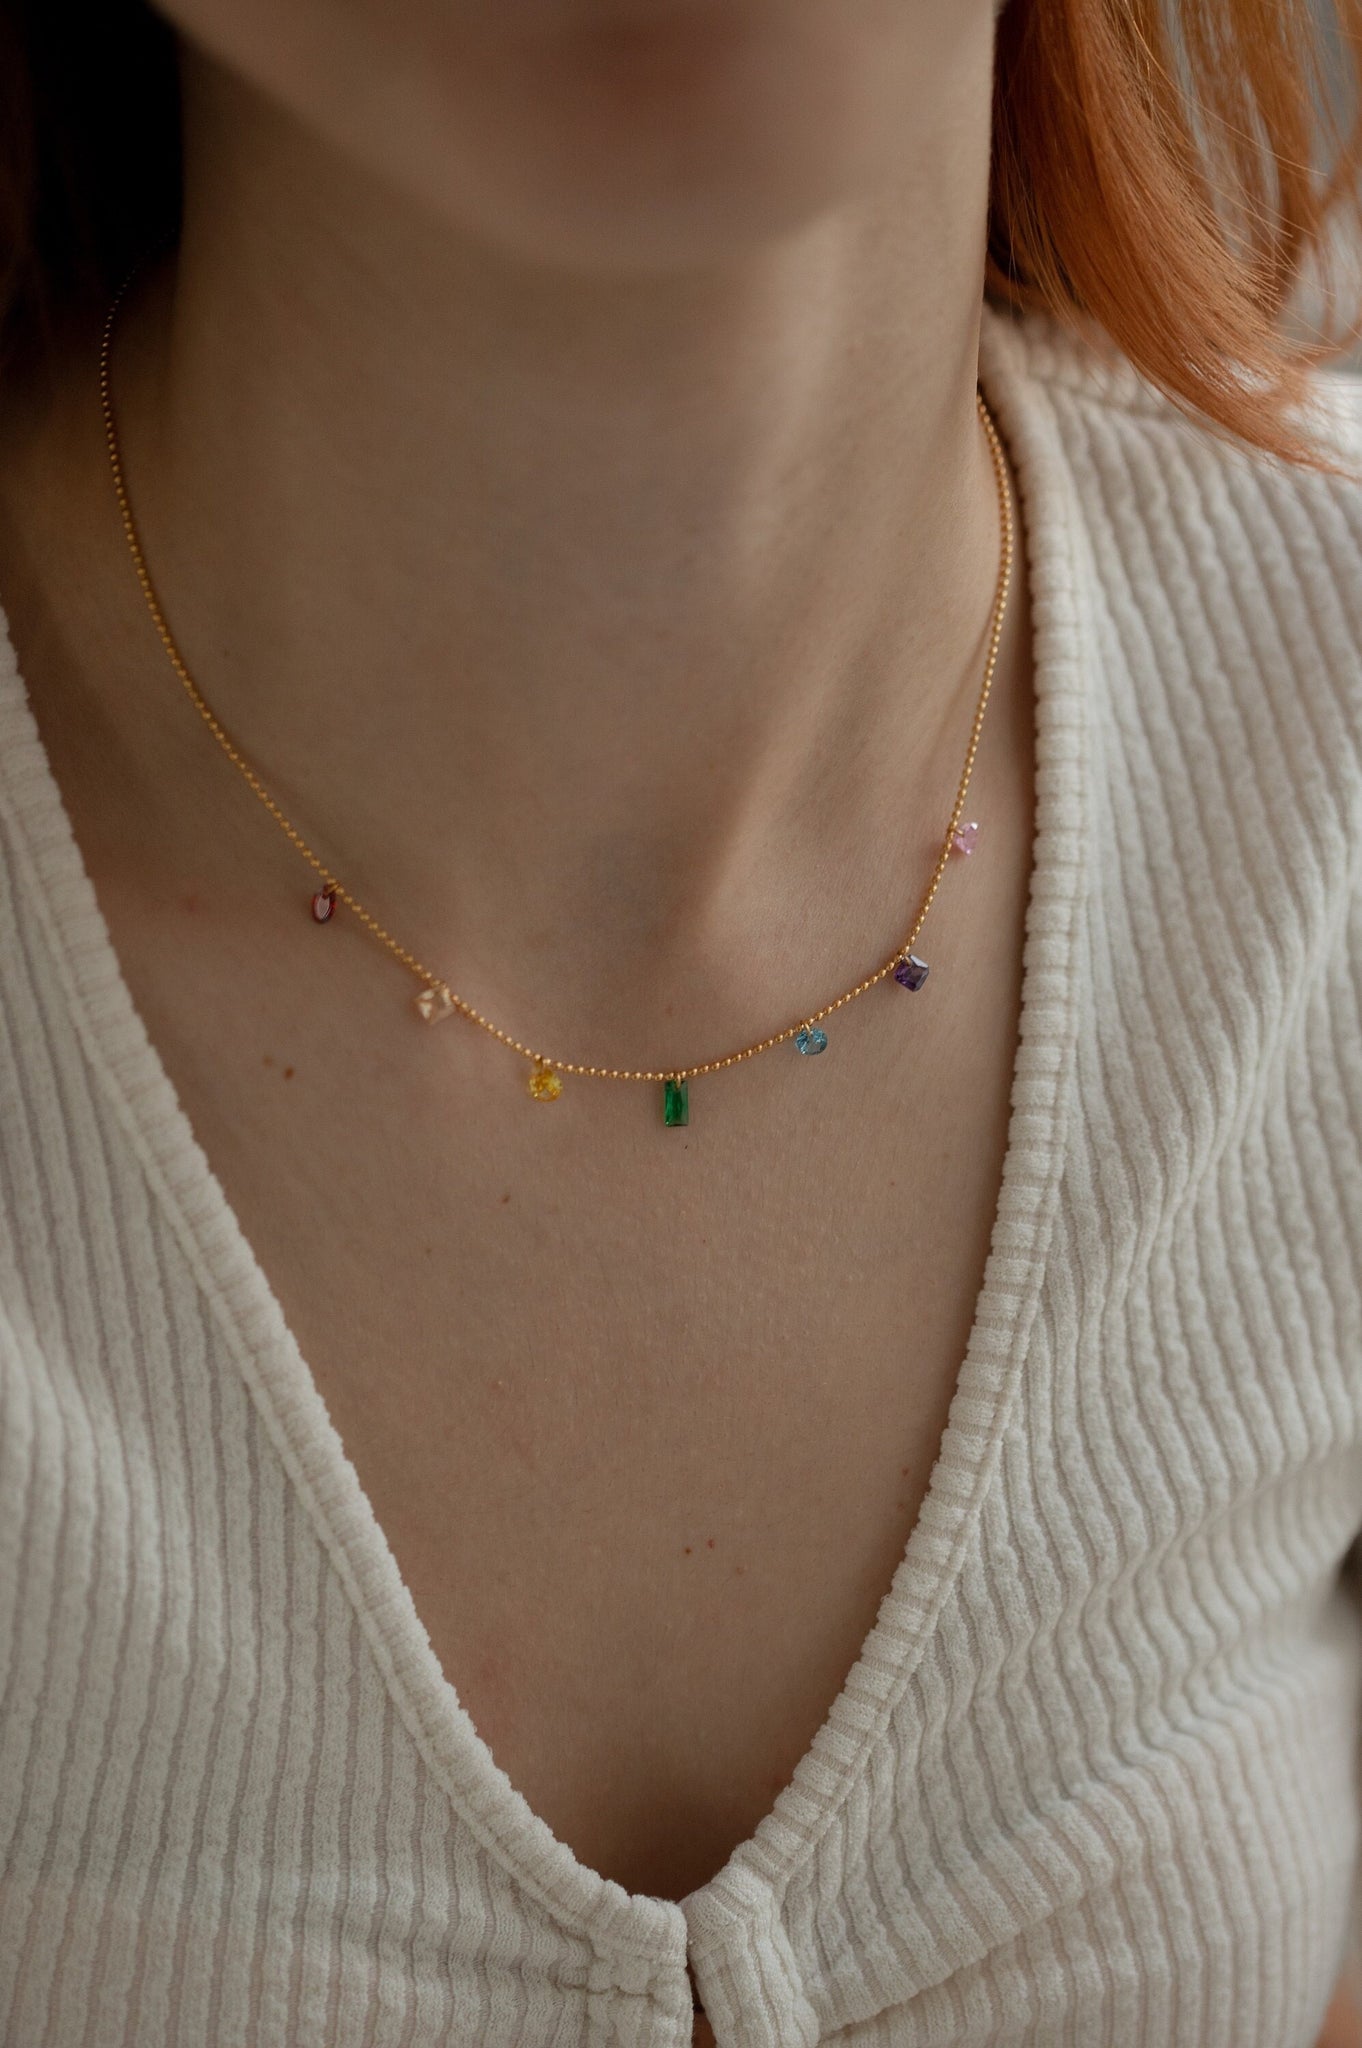 Rainbow Stone Necklace, 18K Gold, Link Charm Necklace, Mama Necklace, Gemstone Necklace, Mothers Day Gift, Delicate Necklace, Unique Jewelry